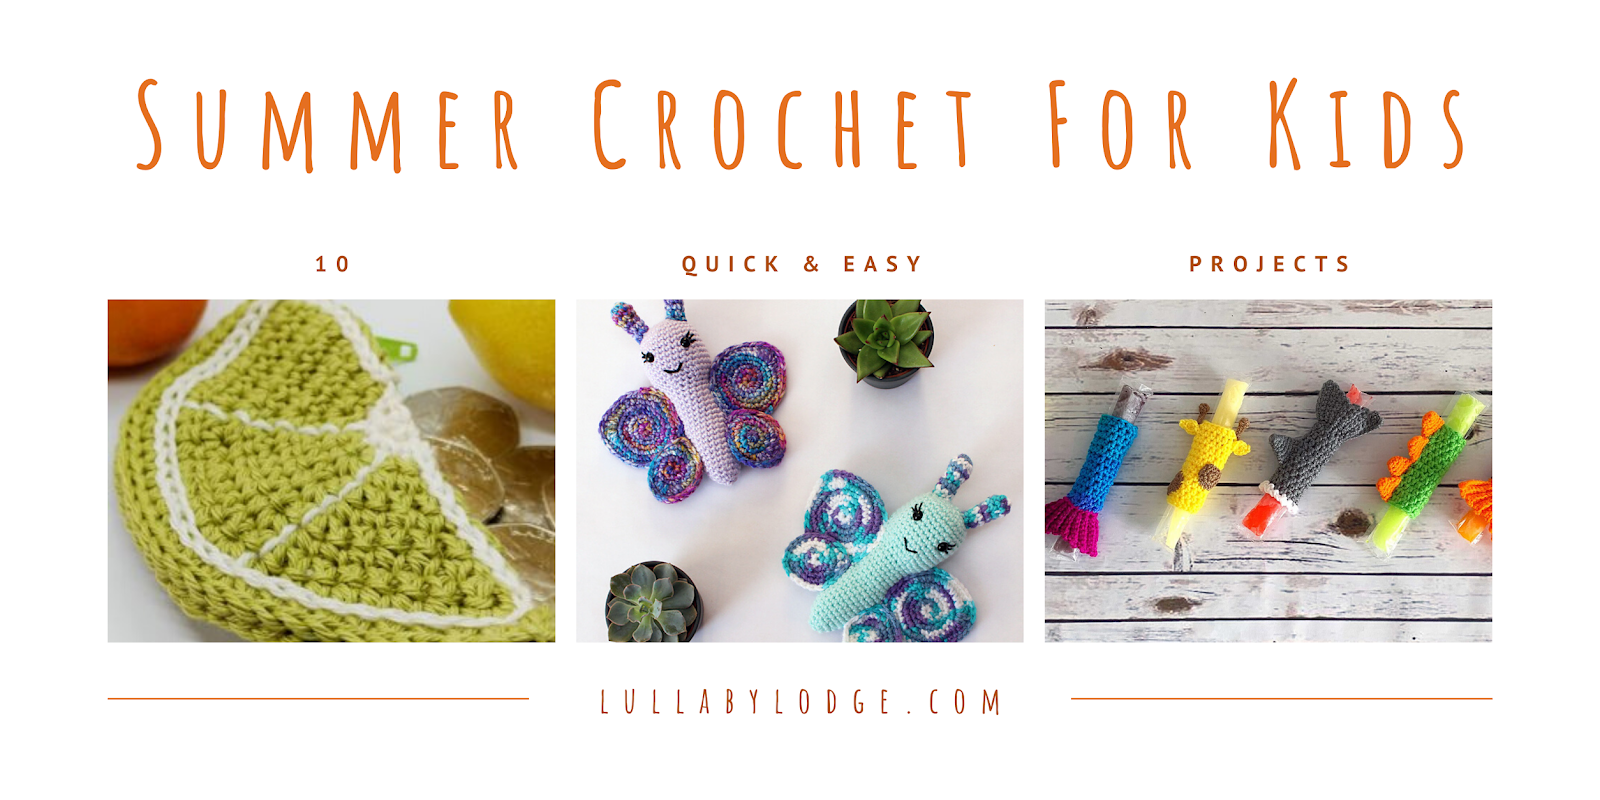 Lullaby Lodge: Summer Crochet For Kids - 10 quick and easy